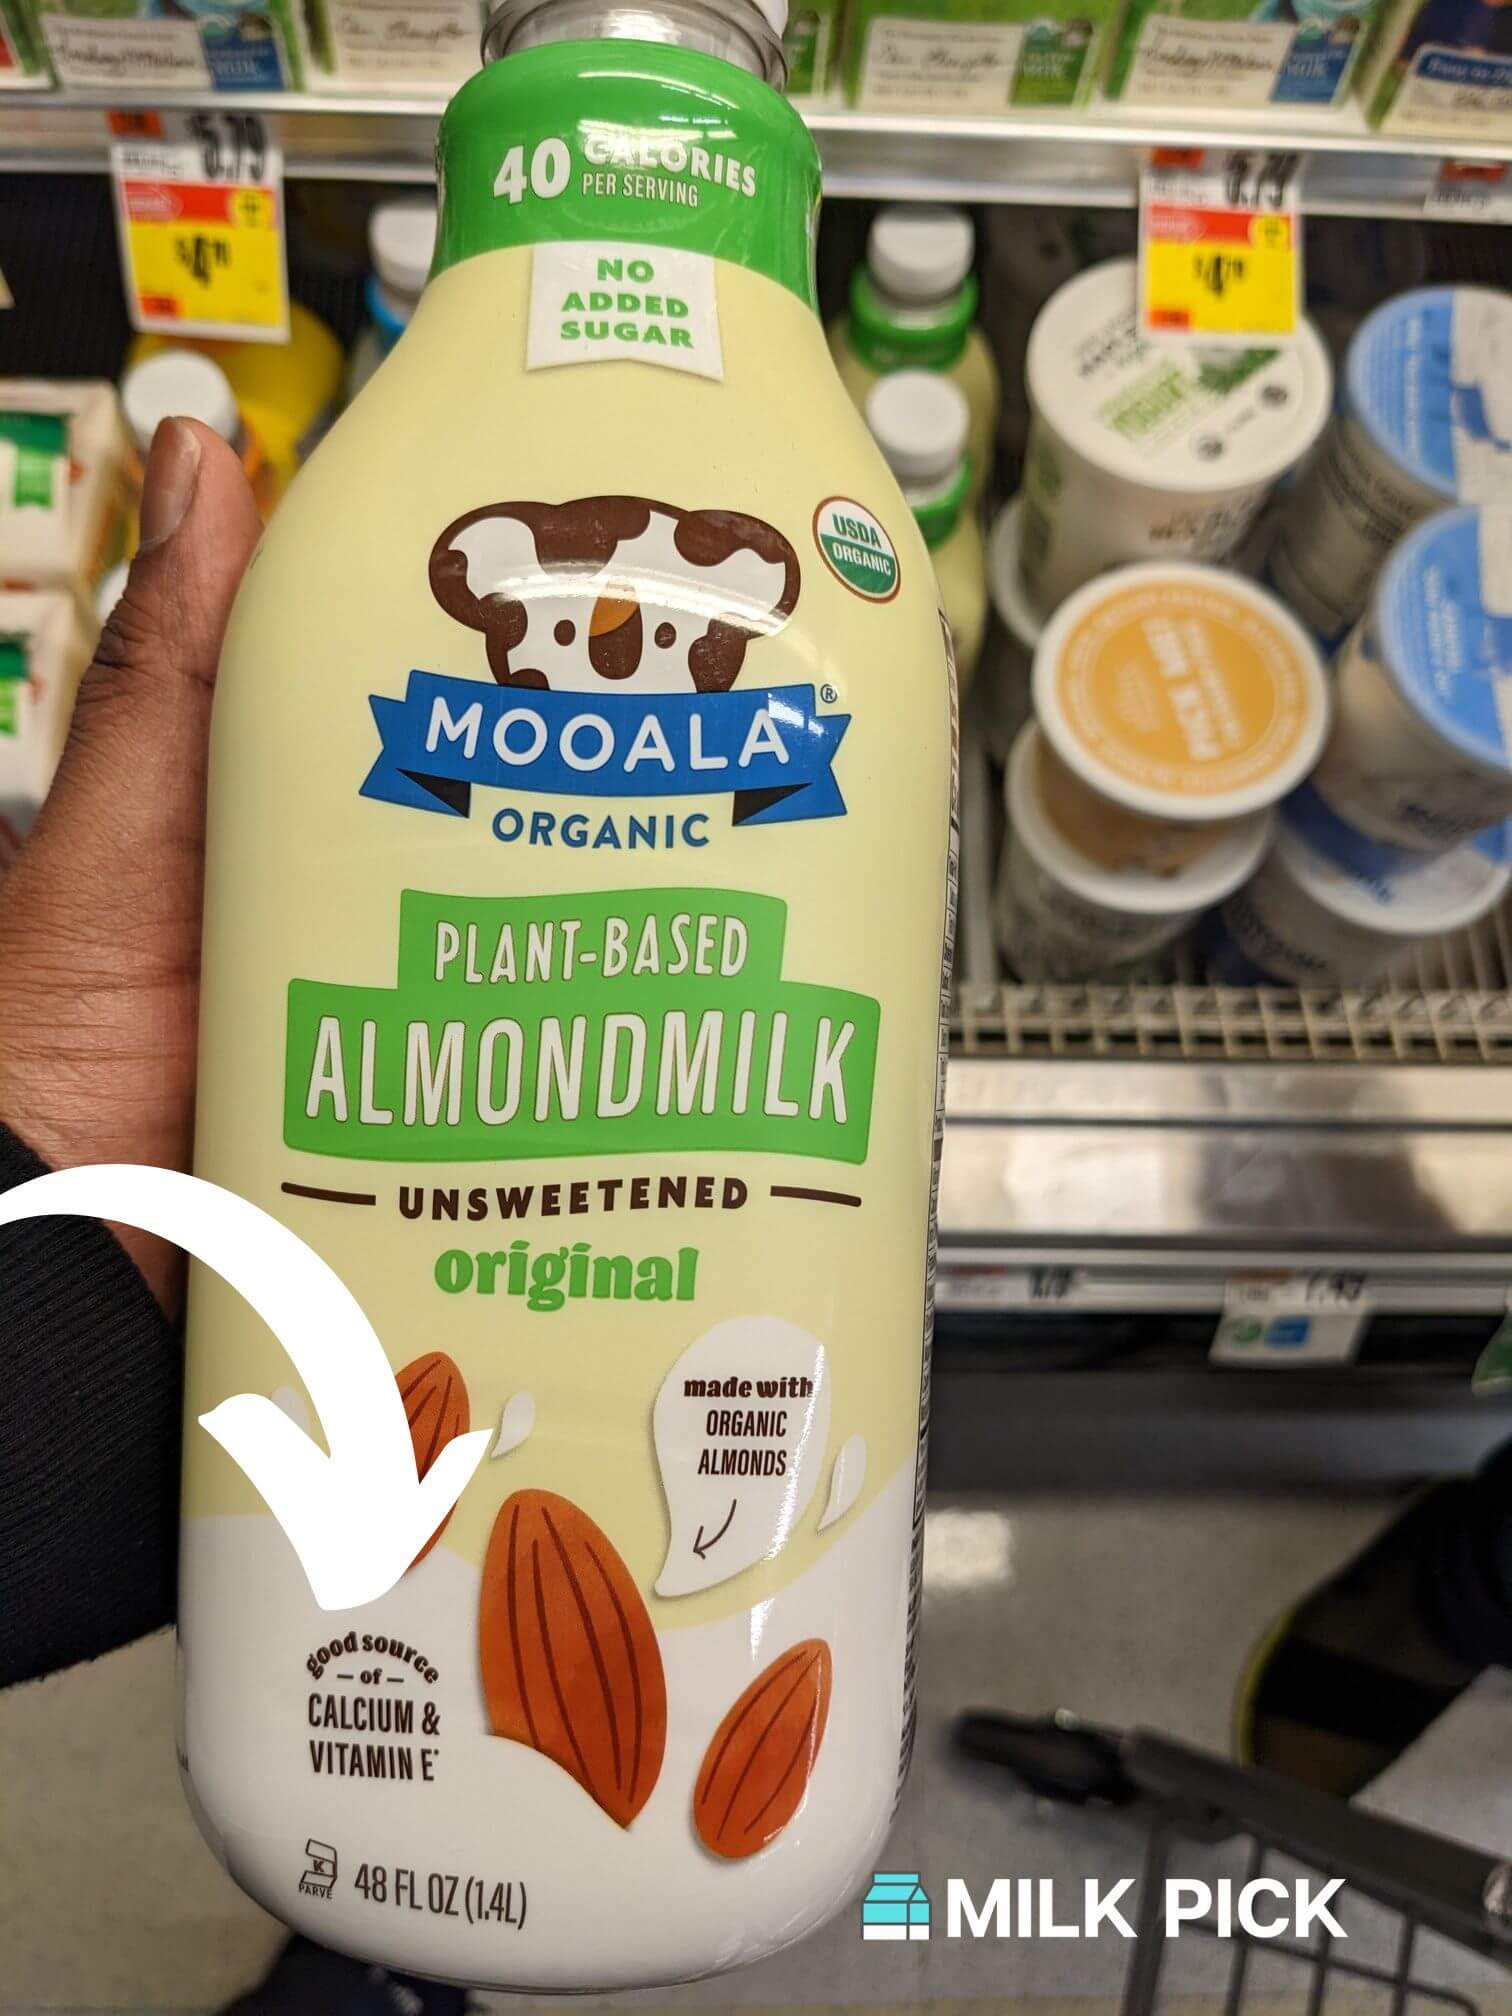 mooala unsweetened almond milk with arrow pointing to calcium and vitamin e